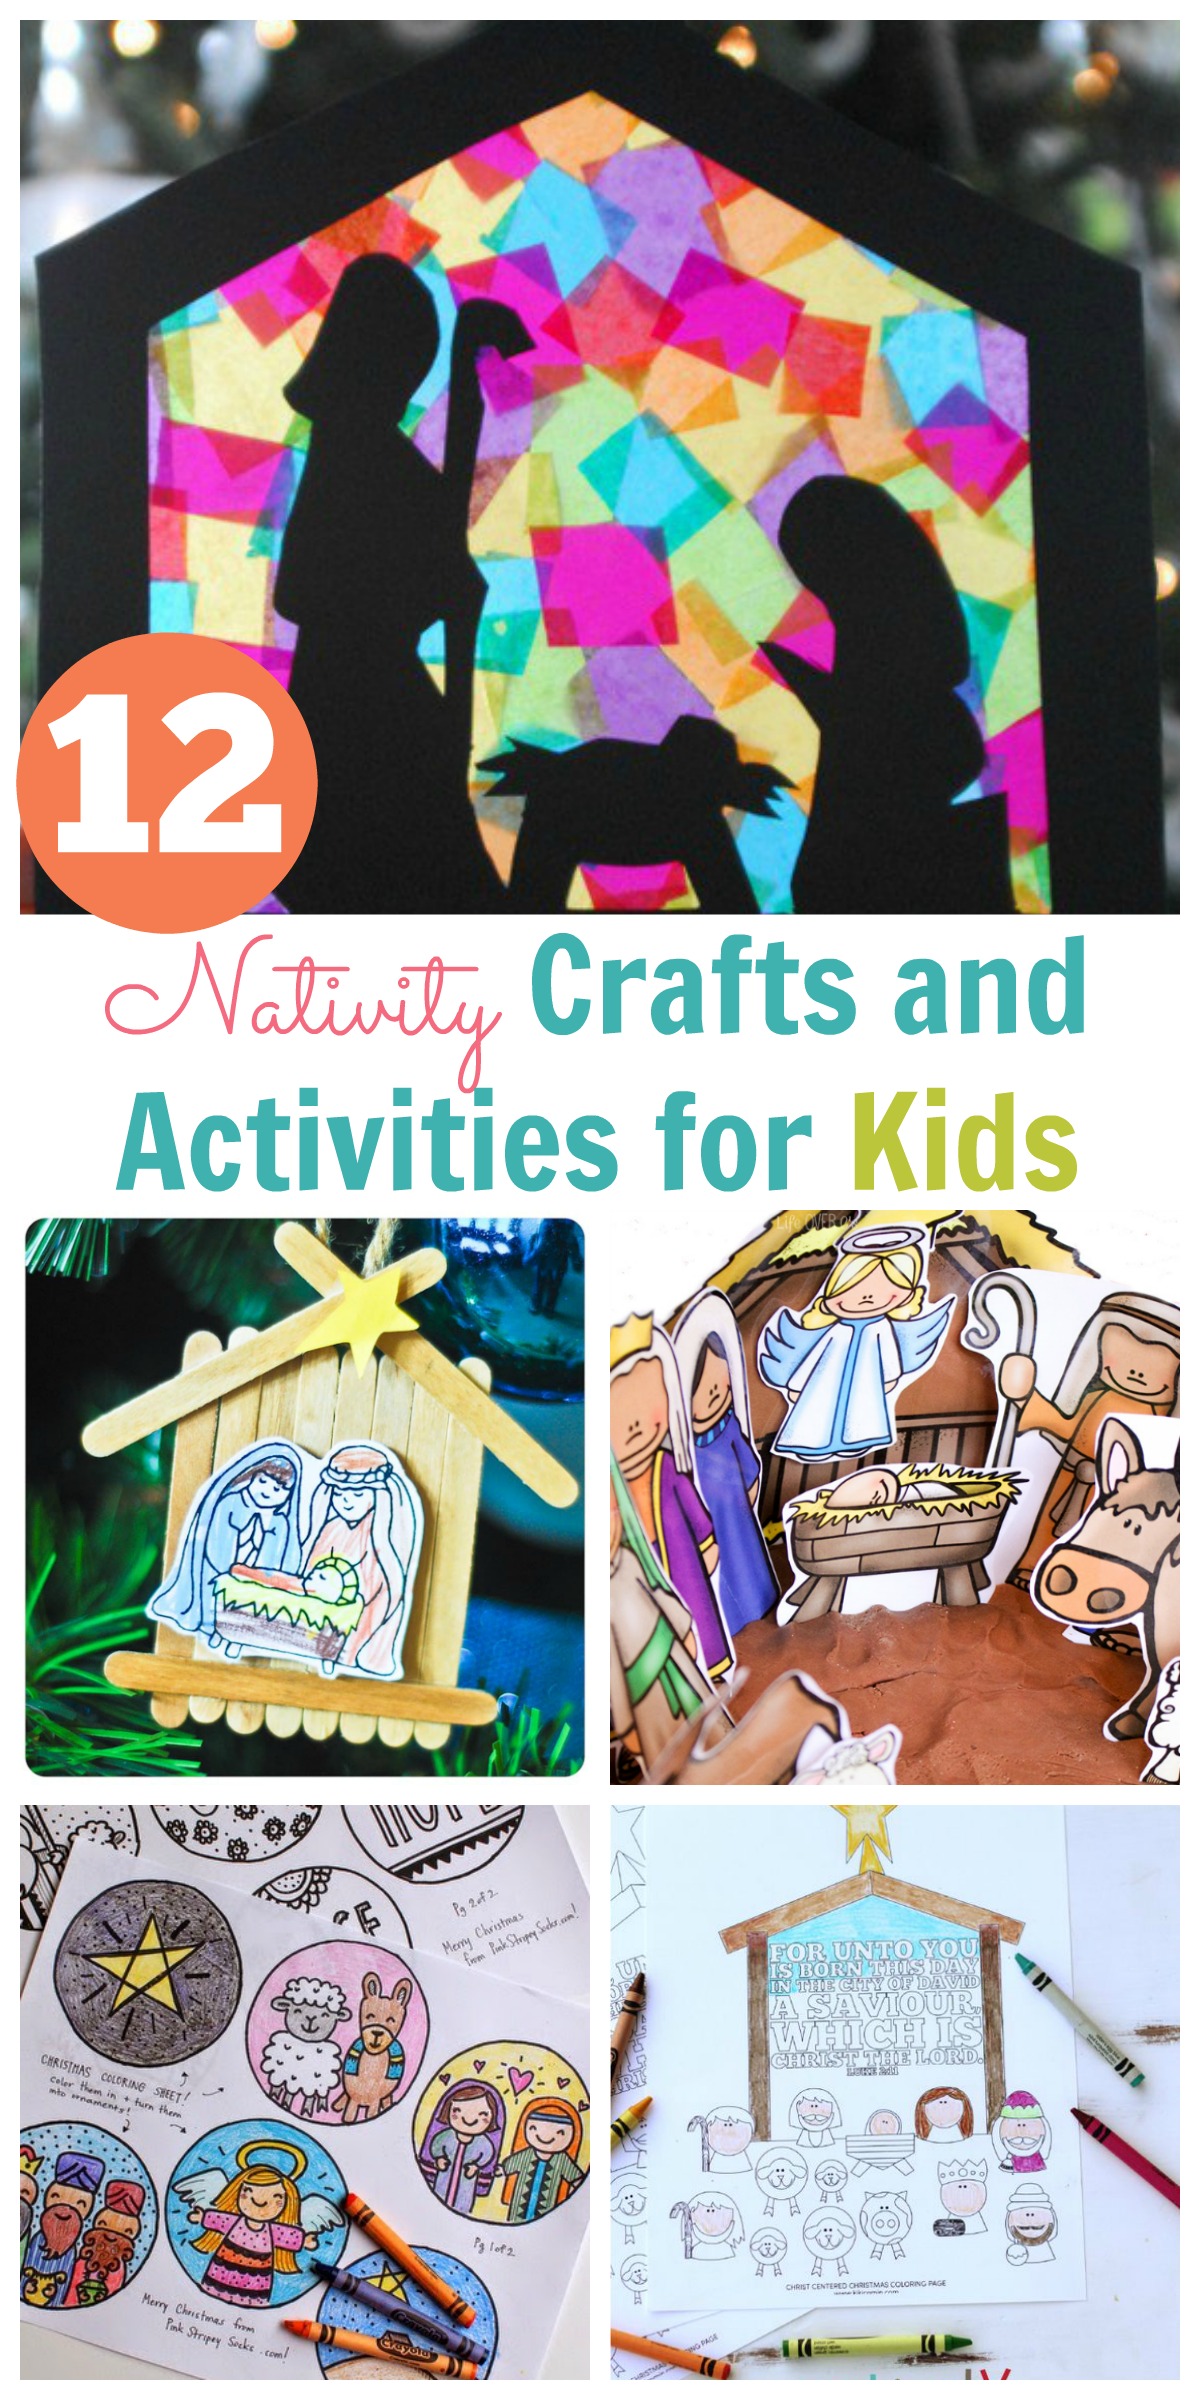 Nativity Crafts and Activities for Kids - Happy Home Fairy